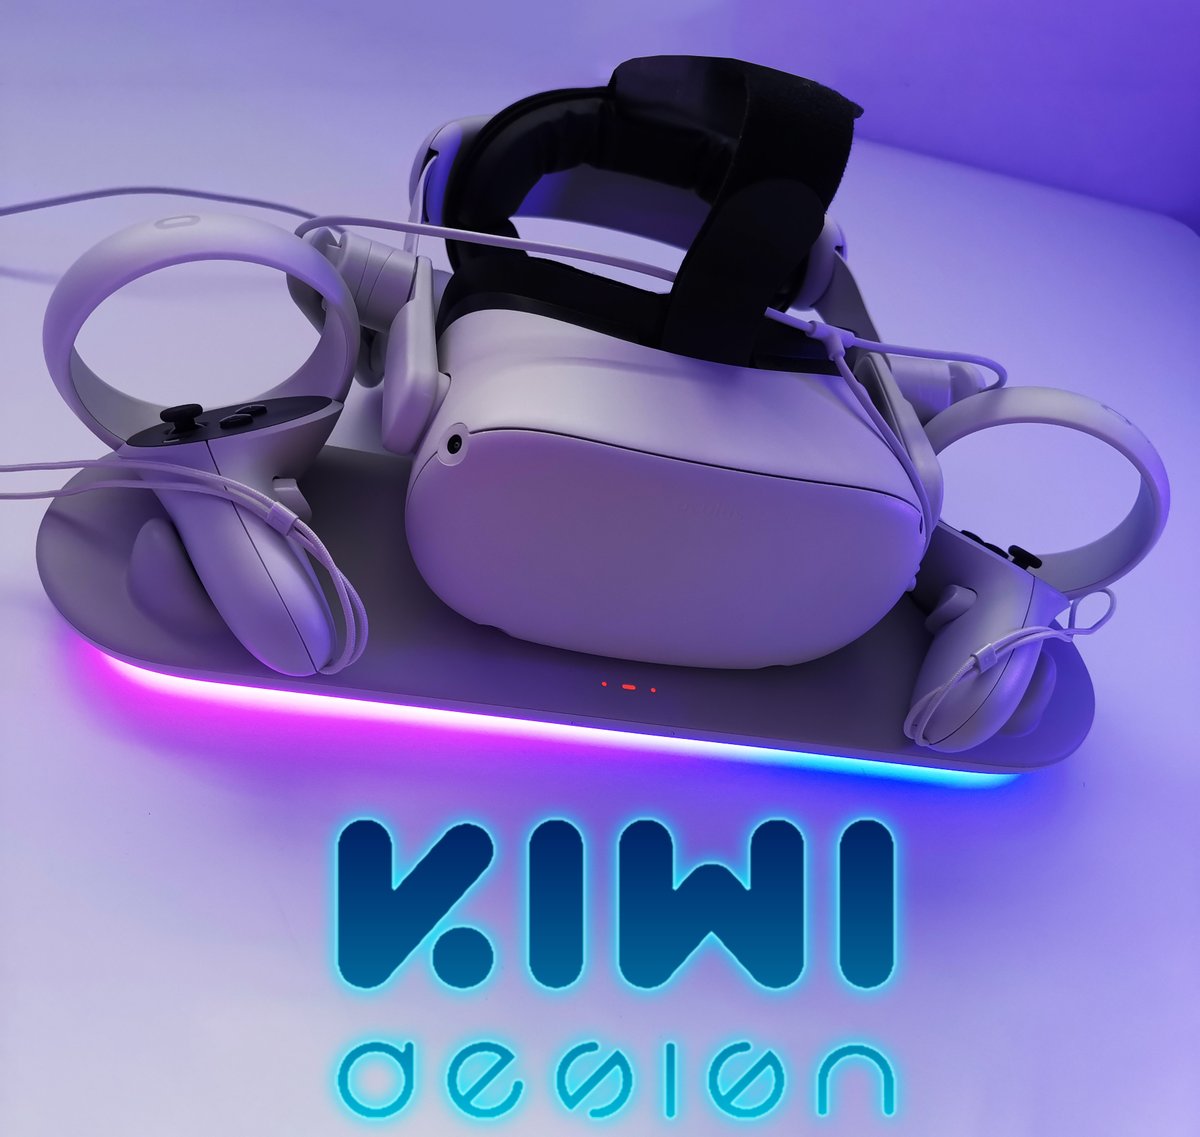 Testing the new @KIWIdesign_shop Charging Dock for #Quest2, works better than expected. 20% off here: kiwidesign.com/products/c...

#kiwidesign #chargingdock #metaquest #Oculus #oculusquest #kiwidesigns #vrsetup #vraccessories #VR #VirtualReality #virtual #review #hardware #tech